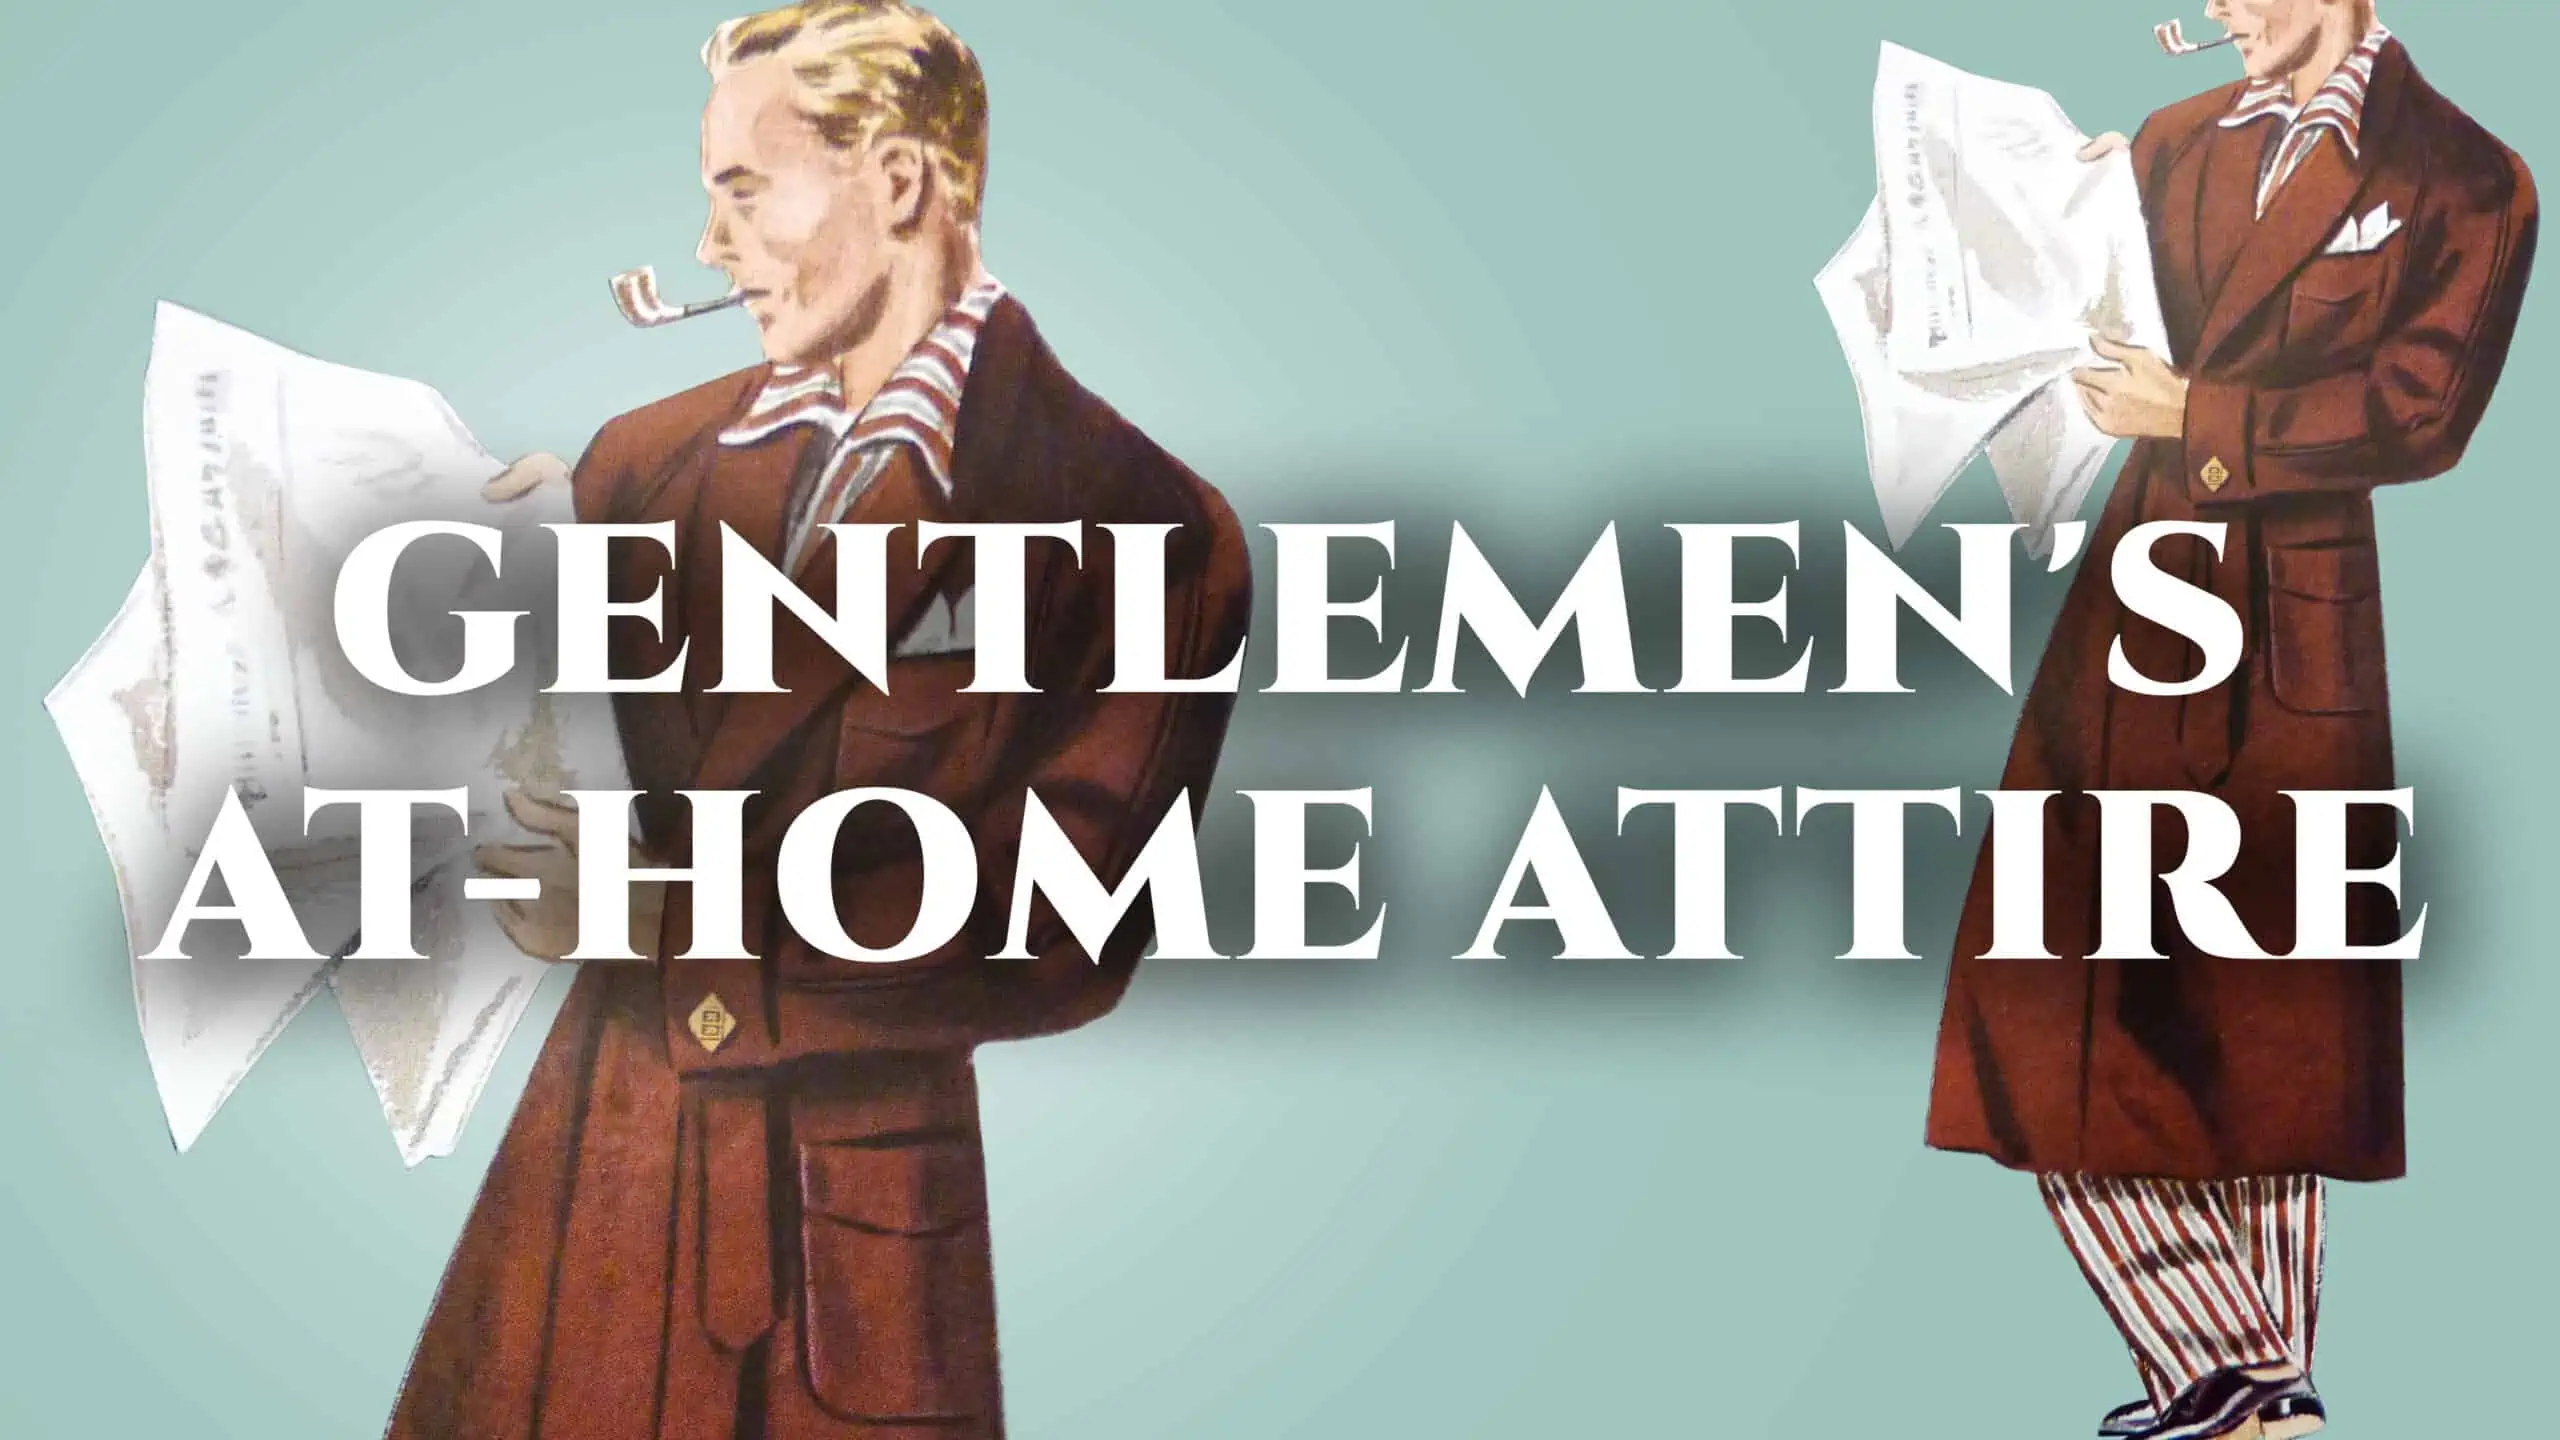 Gentlemens At Home Attire 3840x2160 scaled